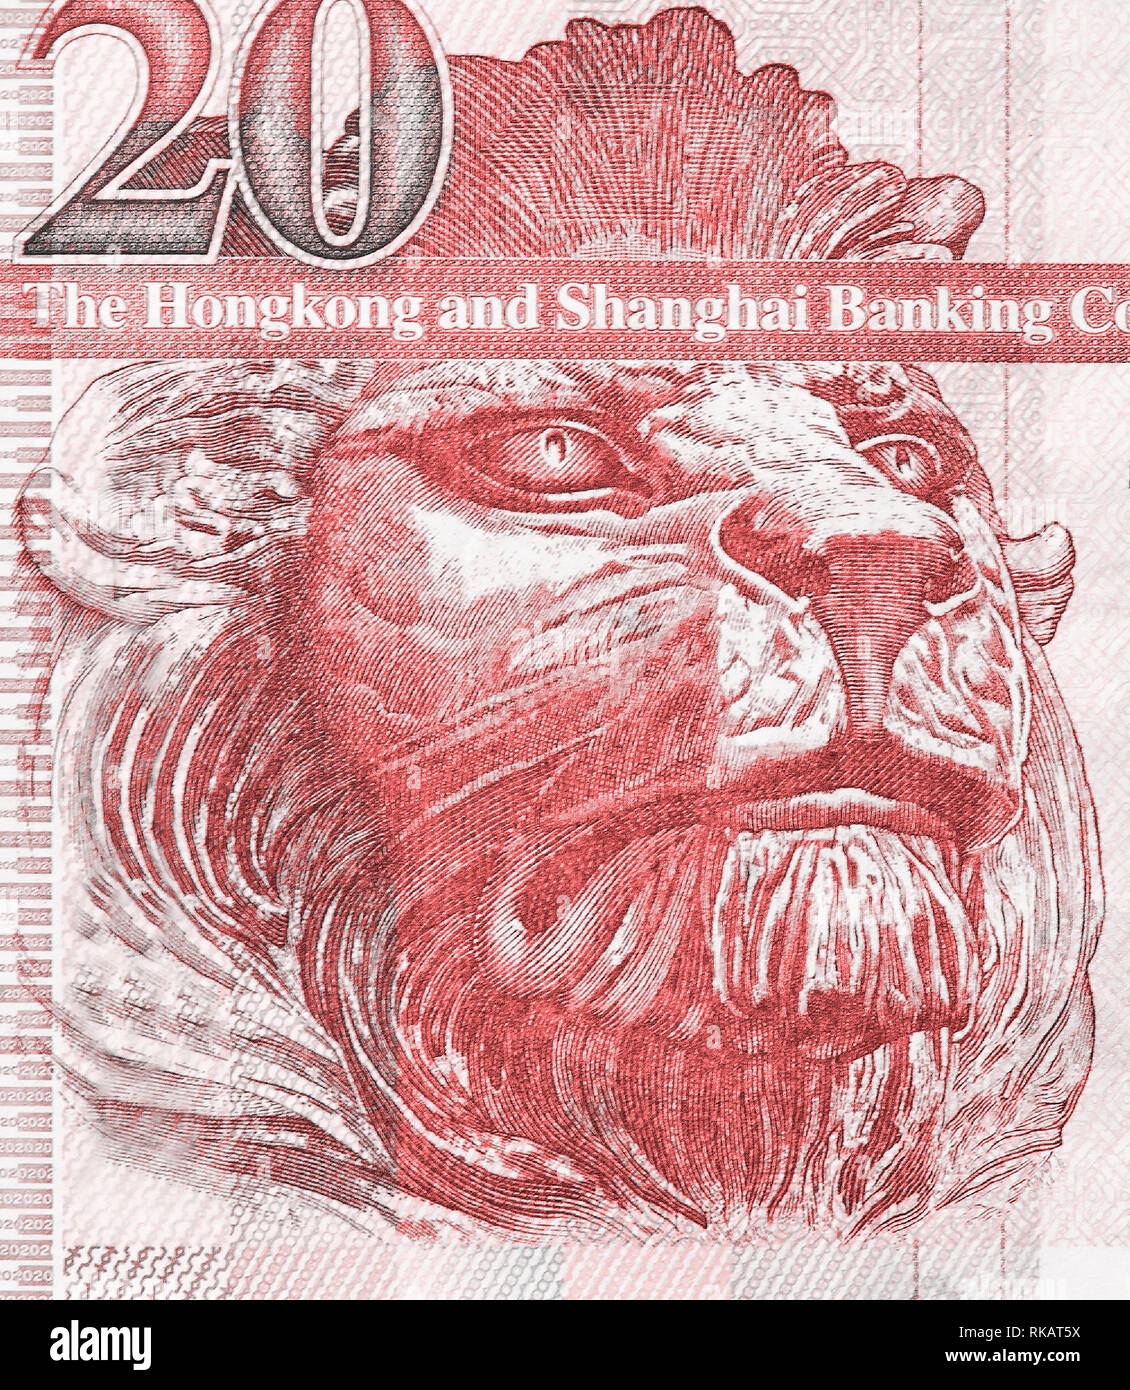 British lion on the fragment of old twenty Hong Kong Dollars banknote close-up. Living coral color toned image Stock Photo